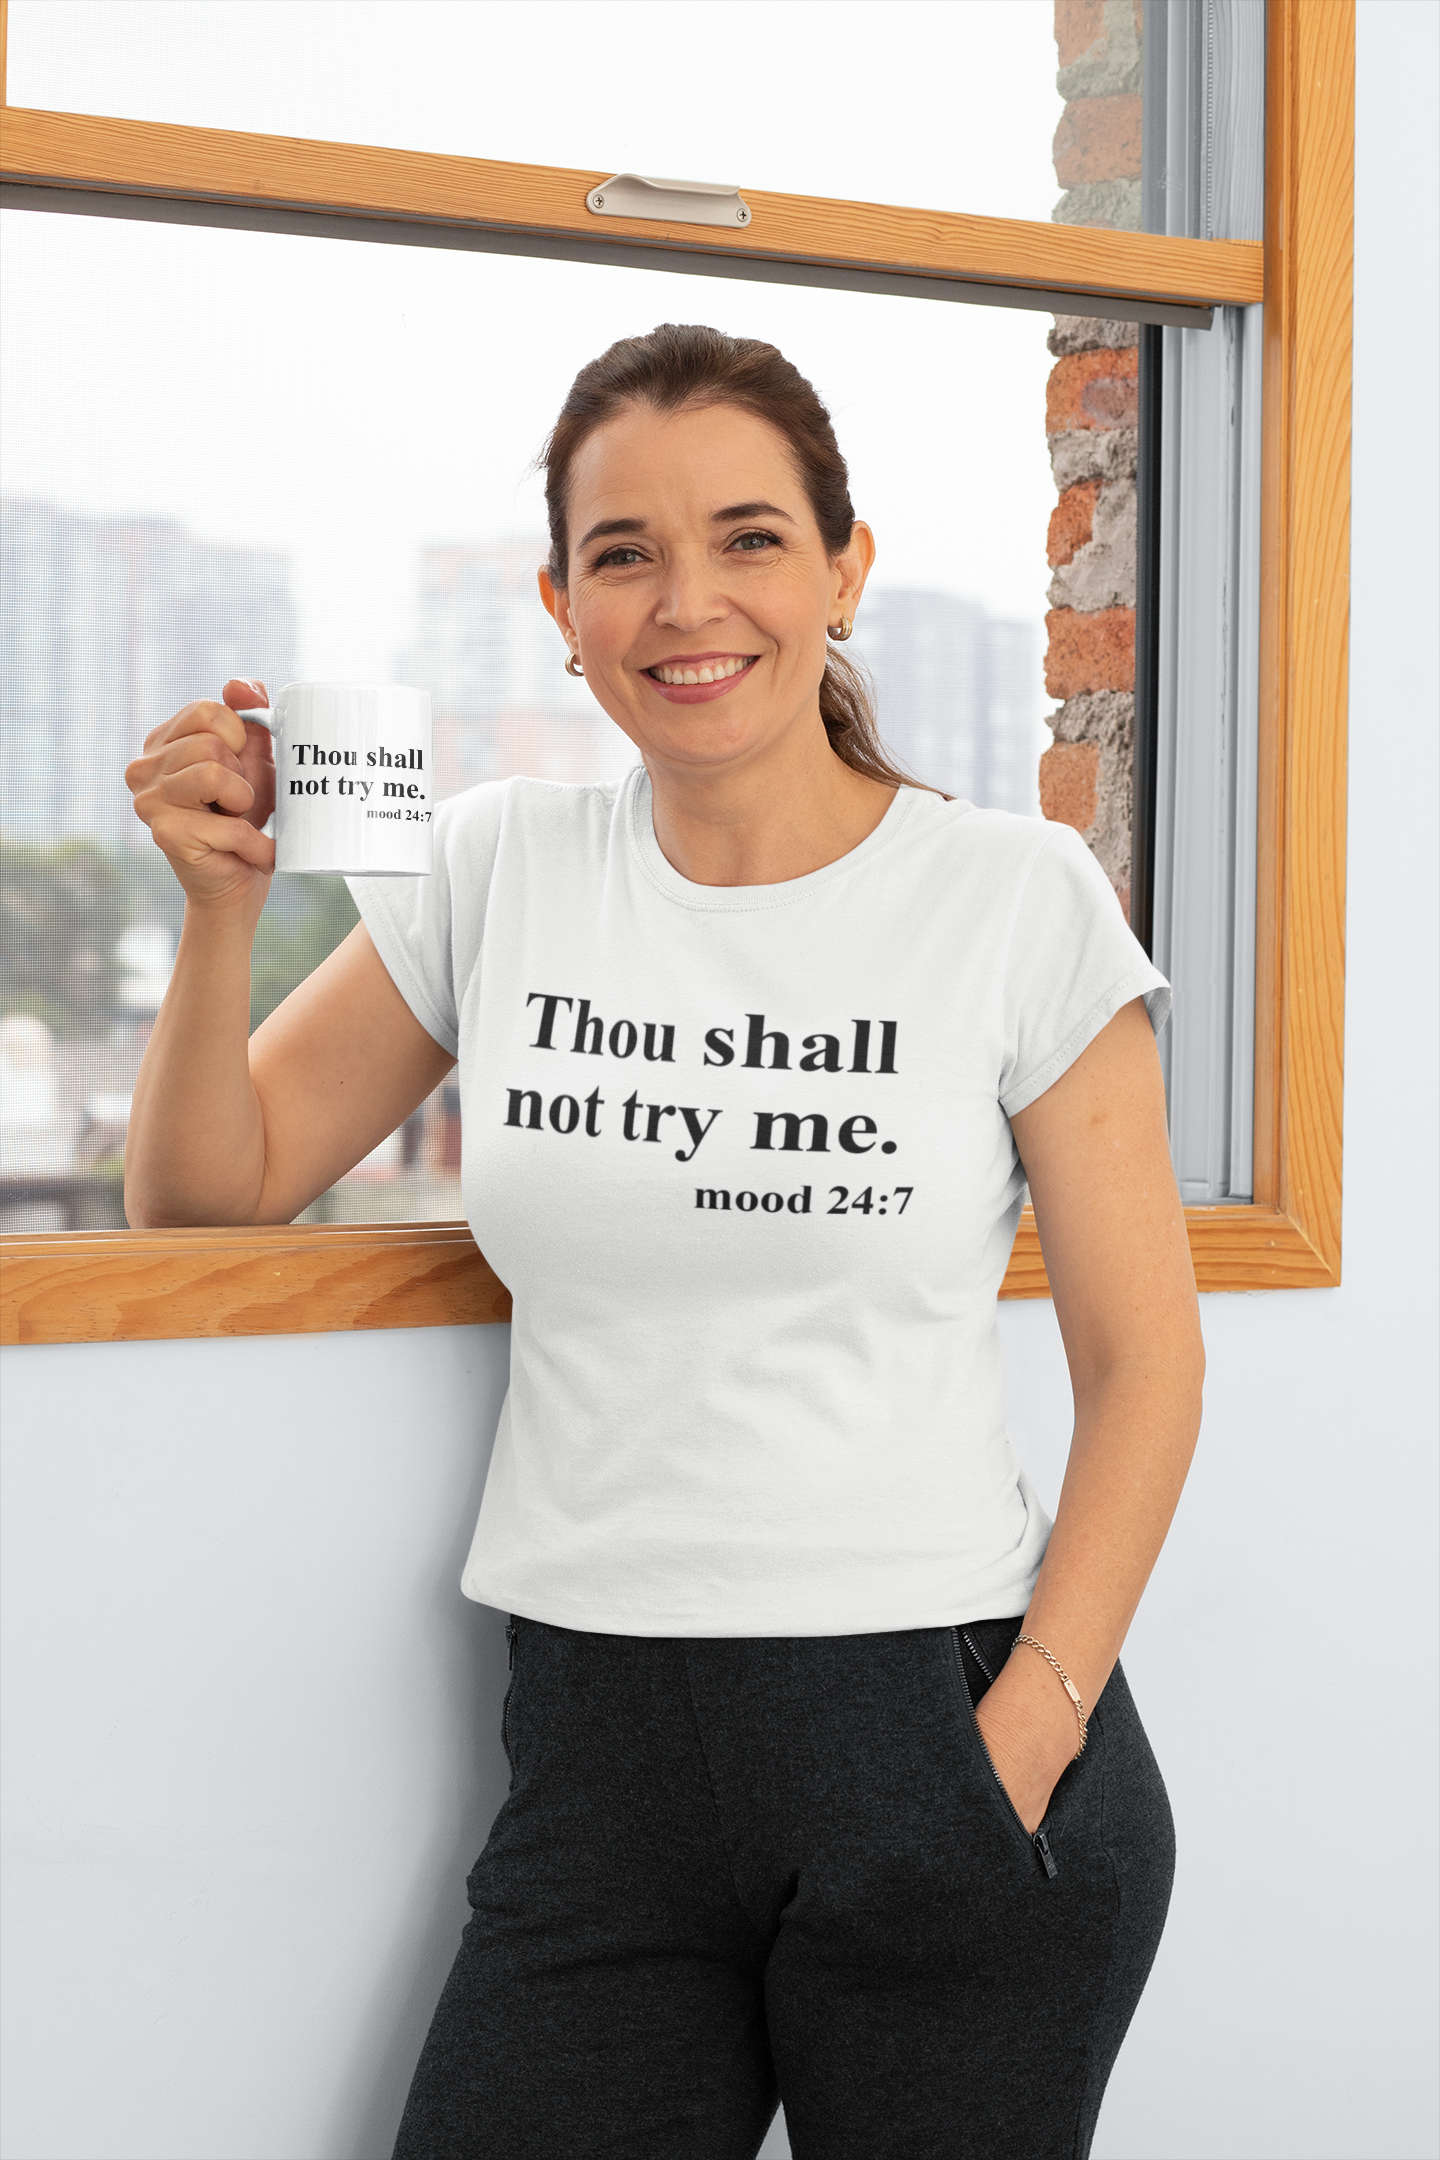 Thou shall not try me - Unisex T-Shirt birthday gift boyfriend gift Christmas gift co-worker gift coworker gift dads day gift Fathers Day Shirt fiance gift funny shirt gift for boyfriend gift for dad gift for grandpa gift for her gift for him gift for husband gift for mom gift for sister gift for wife gift idea girlfriend gift Husband Gift moms gift mothers day gift Mothers Day shirt school gift T-Shirt teacher gift Unique gift wife gift